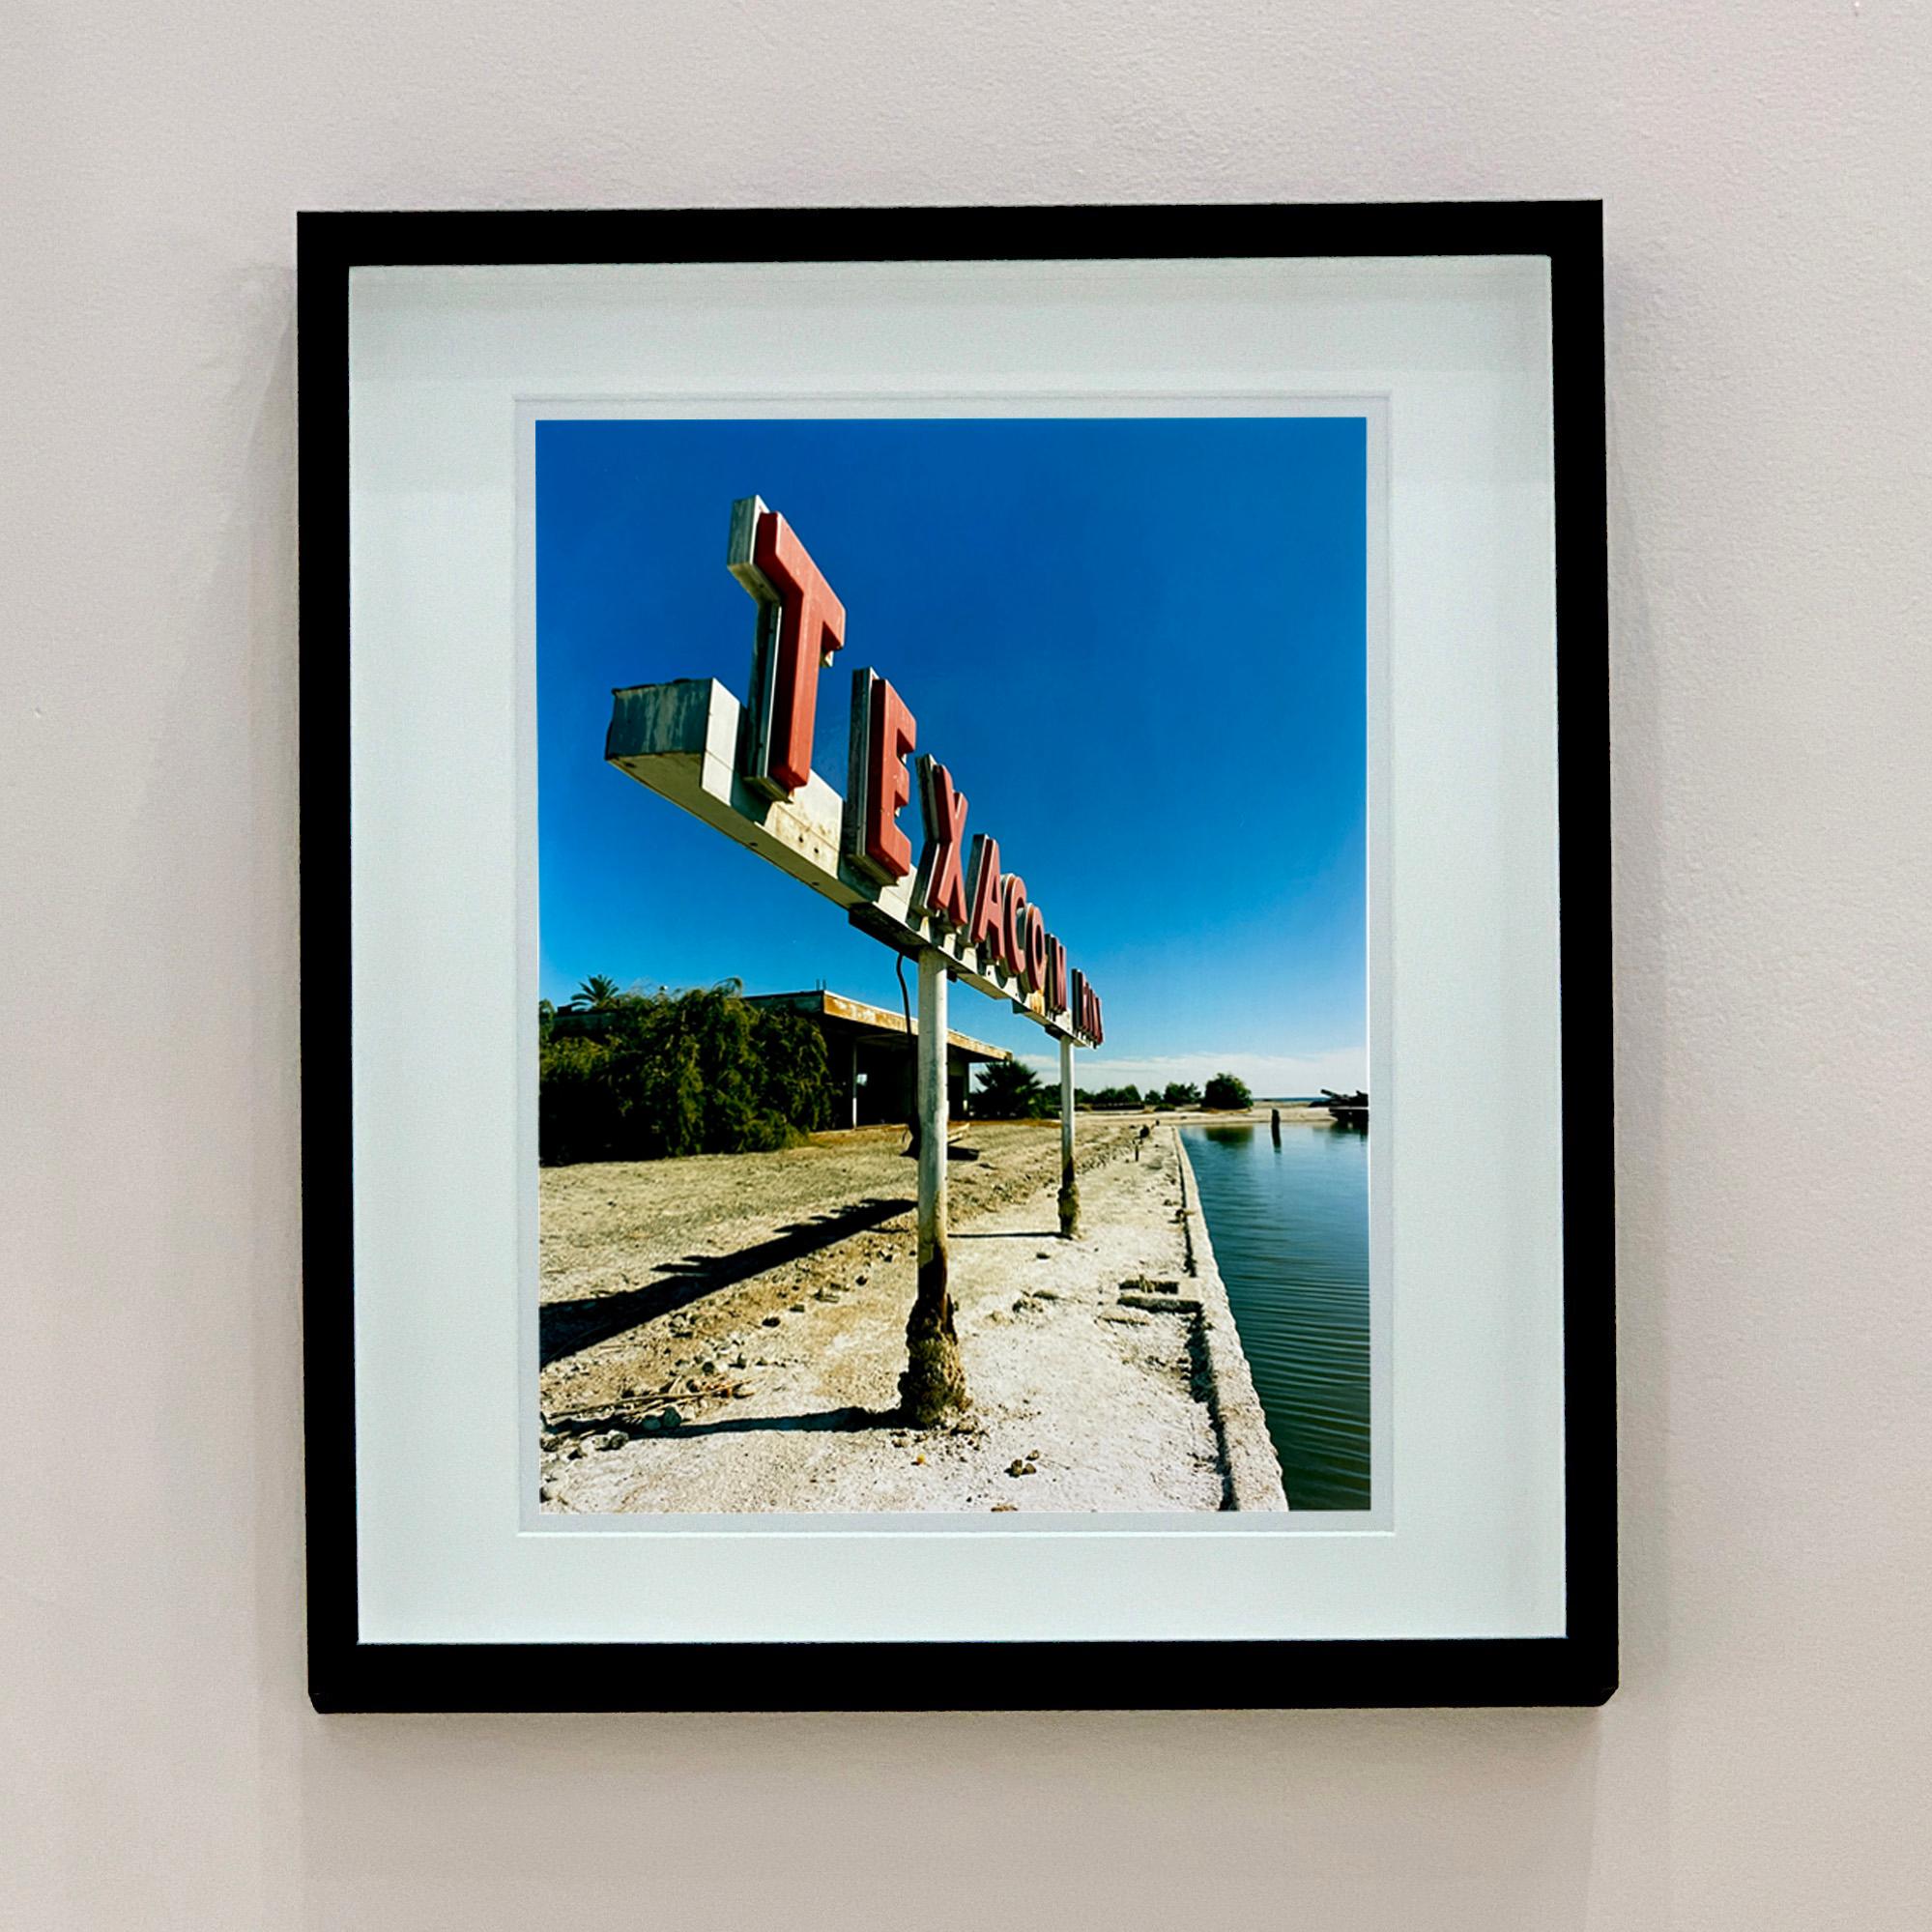 Texaco Marine sign, from Richard Heeps 'Salton Sea' series. This large advertising sign on the bank of California's largest marina, once a popular celebrity mooring point. The sign is no longer there so Richard has captured the iconic past before it